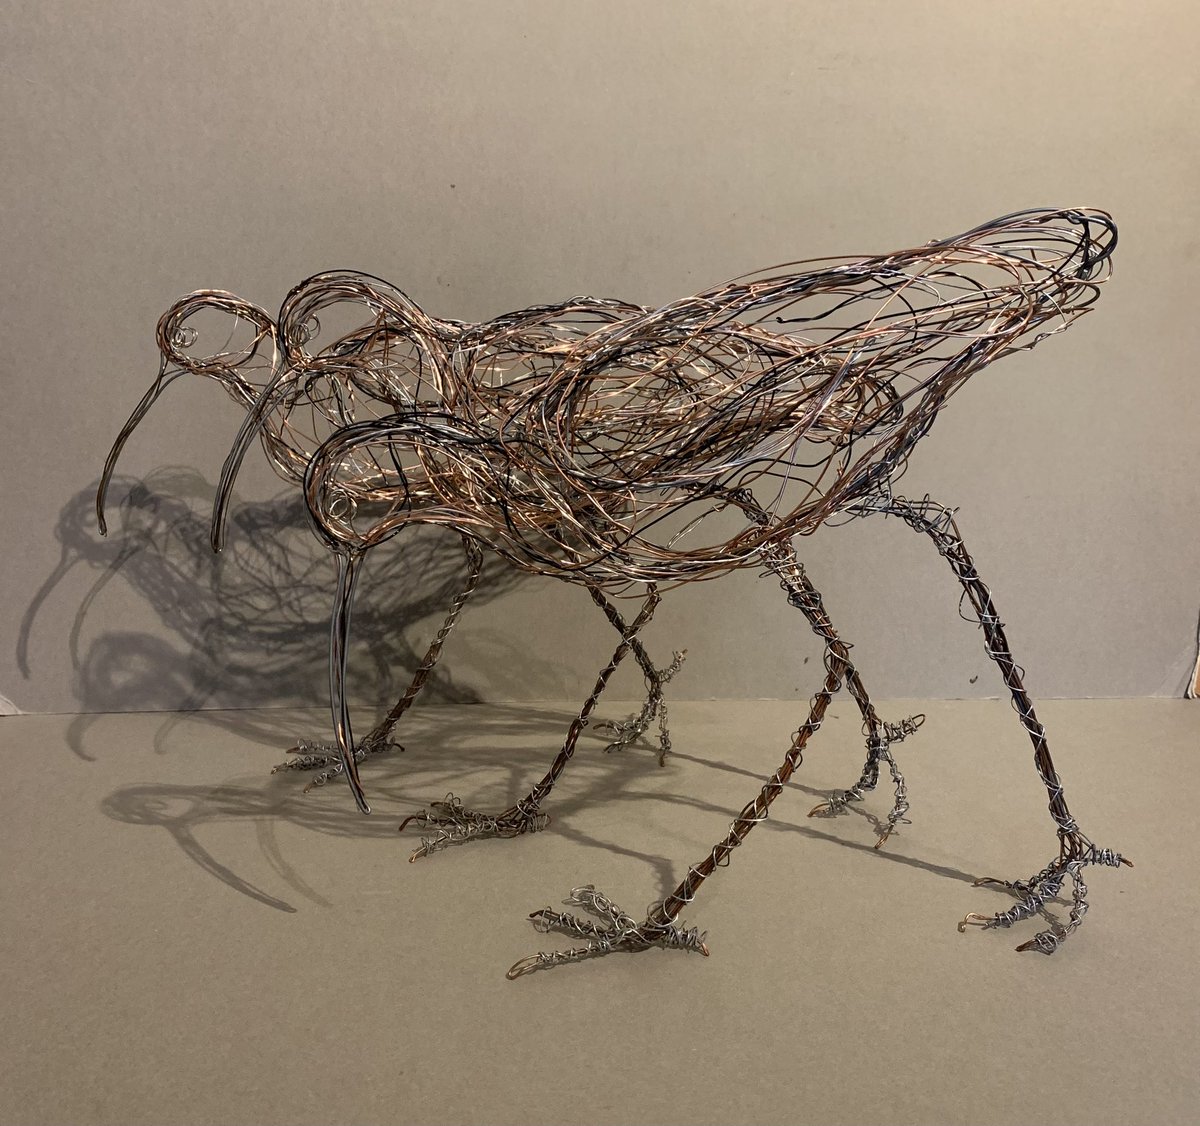 “Curlew” Busy pulling Birds together for the upcoming exhibition at Artspace Woodbridge,Suffolk ,details coming soon. #curlew #suffolkartist #wireart #shorebirds #suffolkbirds #artlover